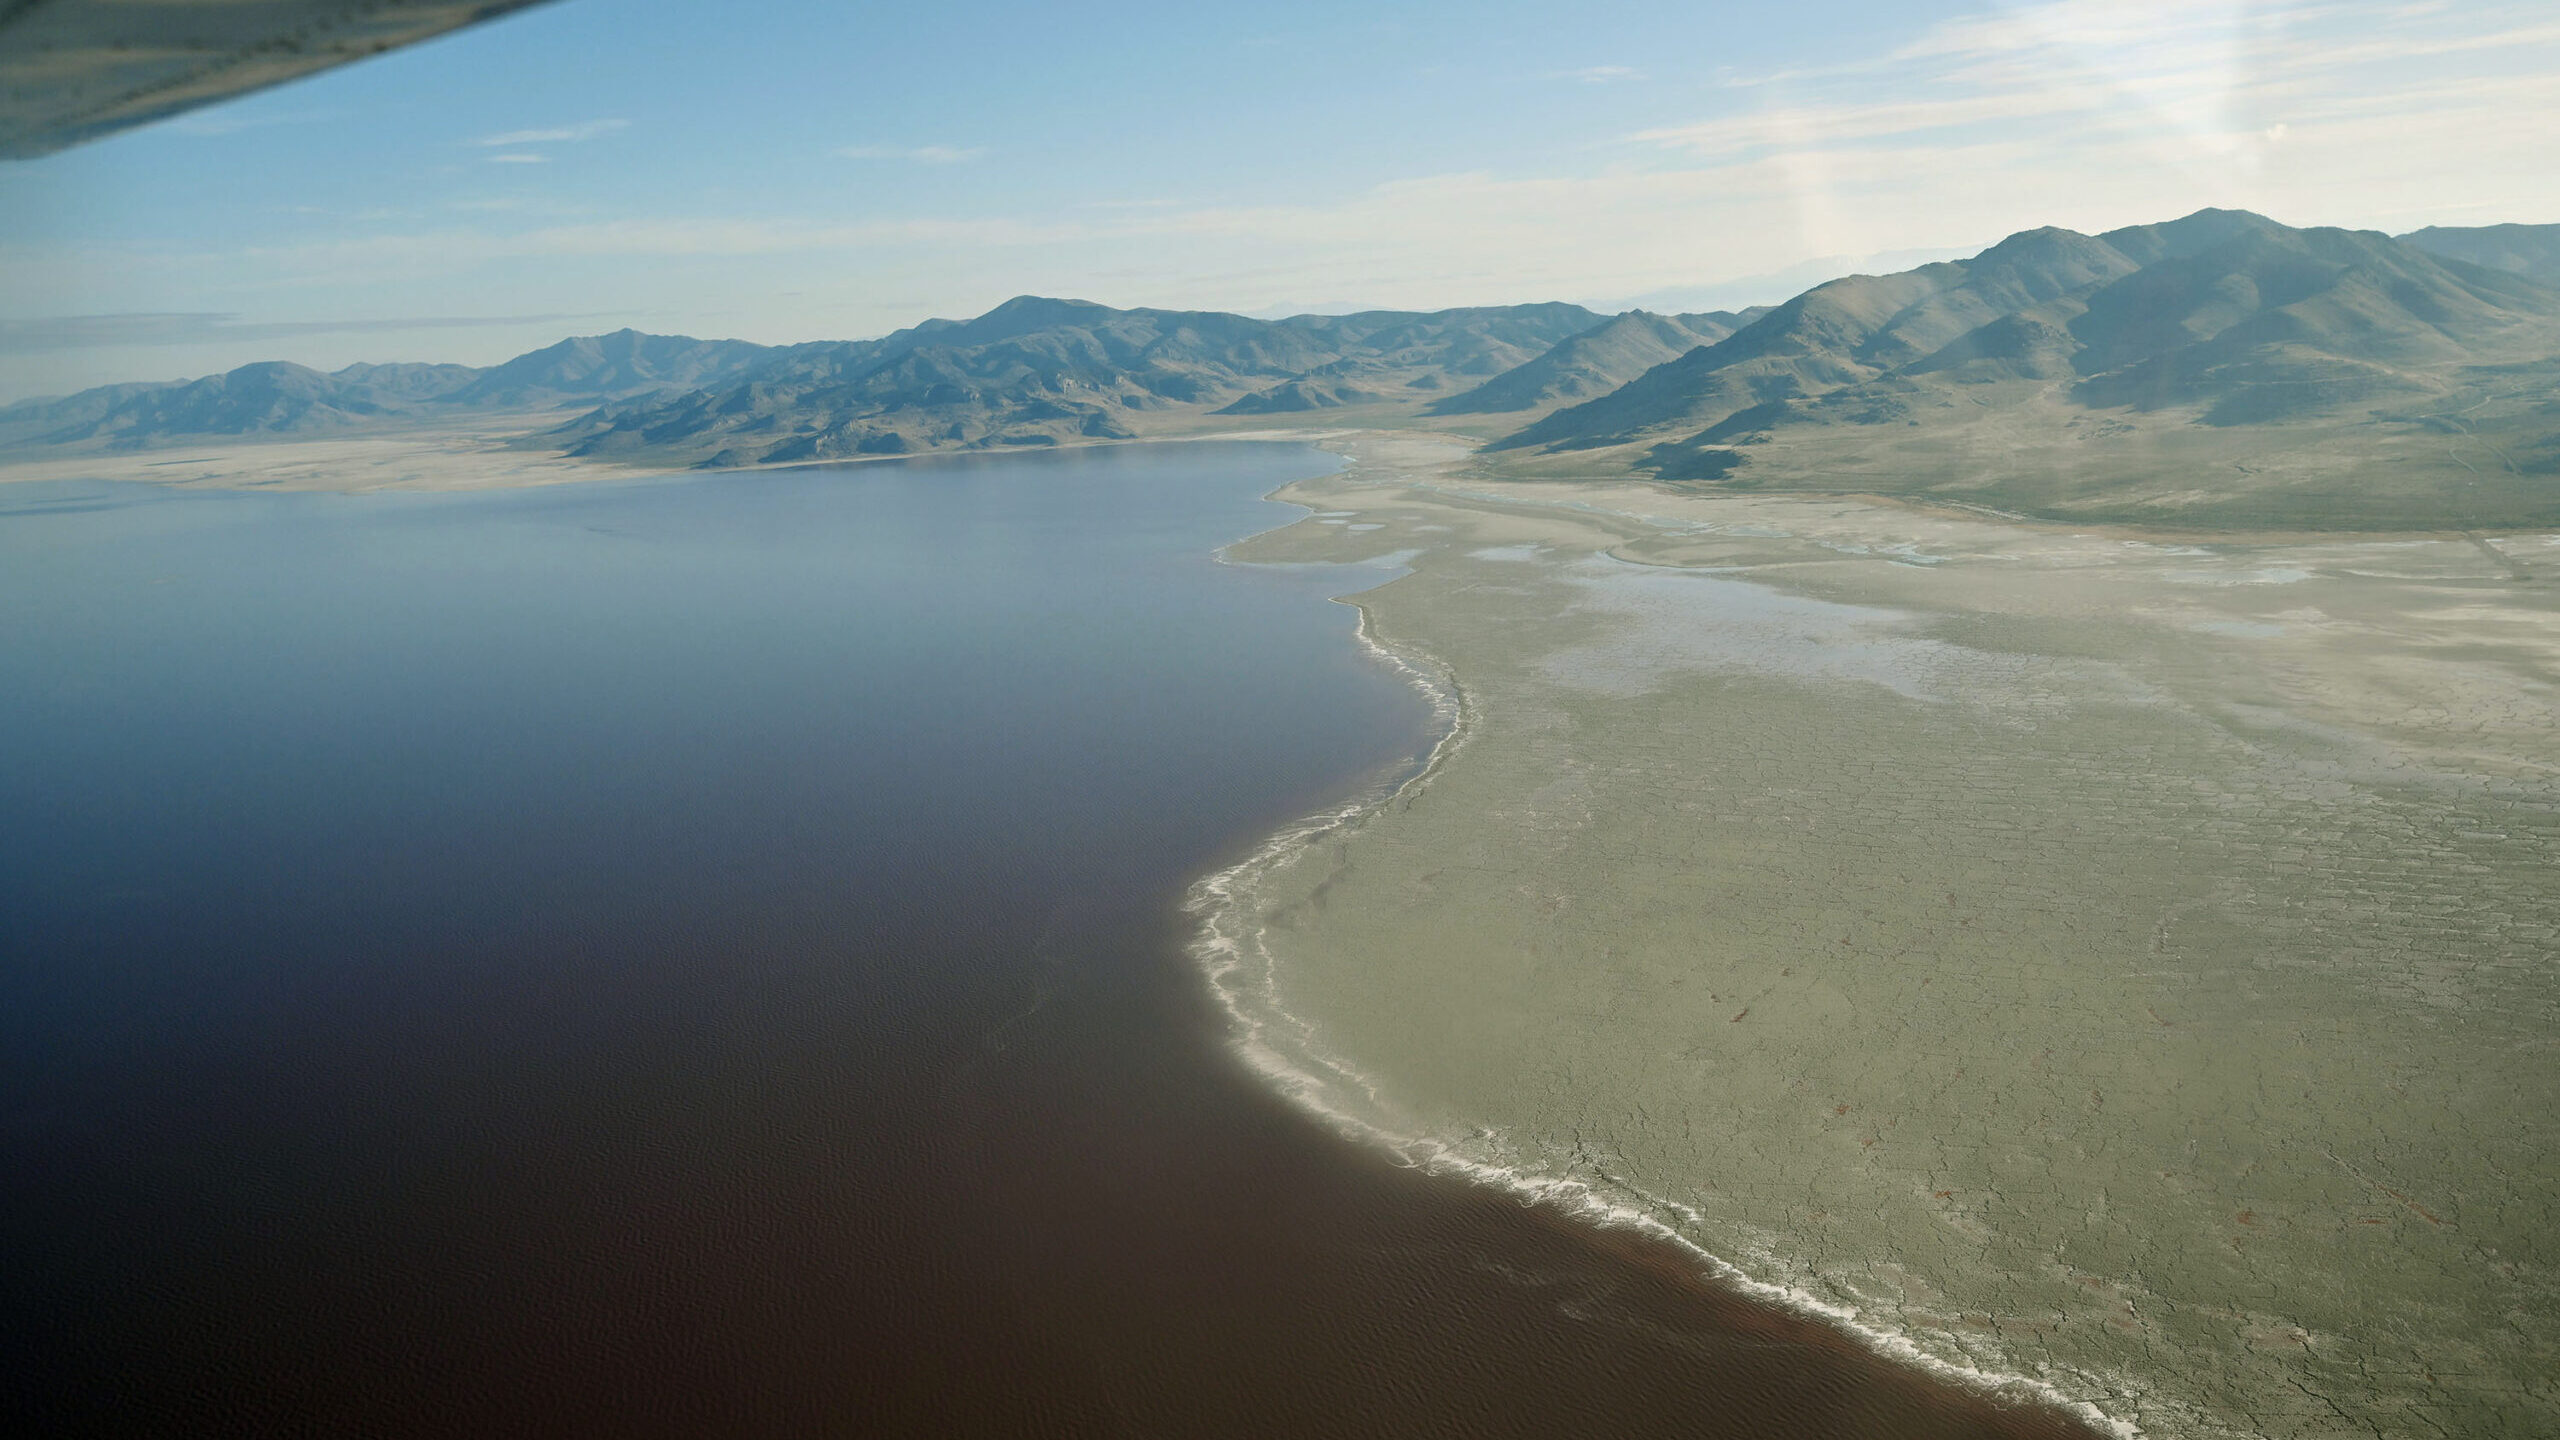 Utah's water supply is doing well. Promontory Point during an EcoFlight around the Great Salt Lake....